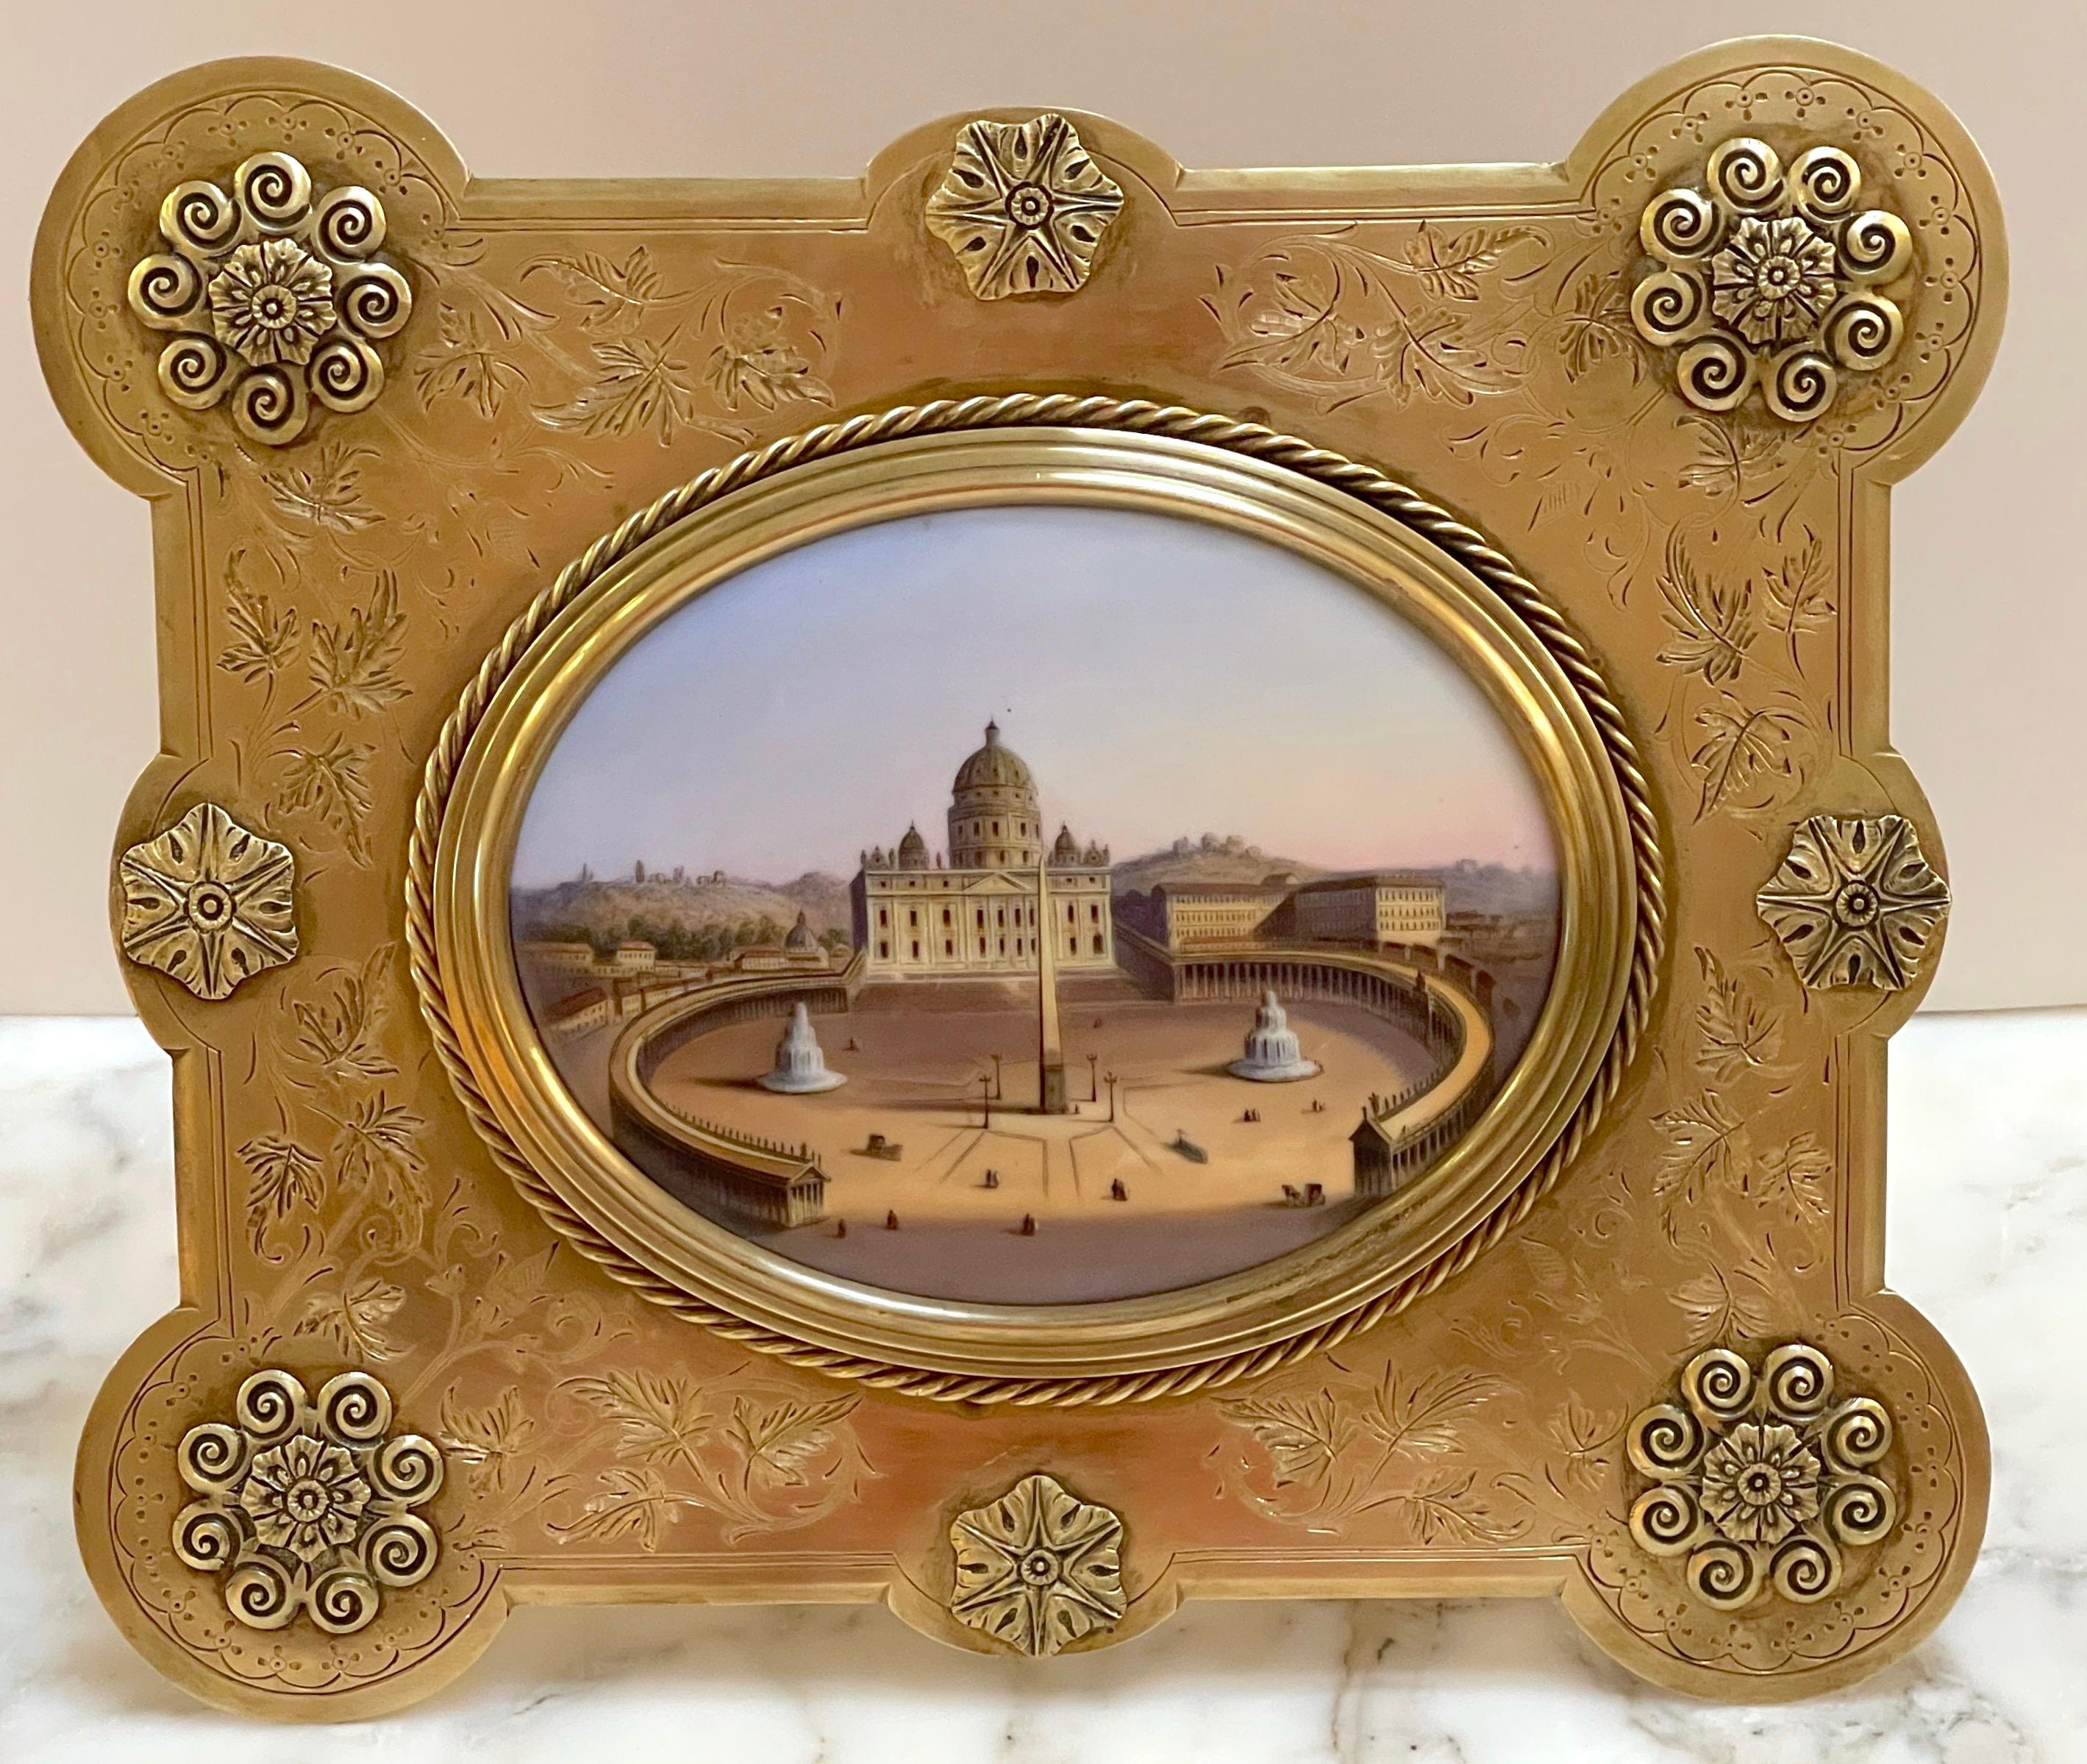 19th century Grand Tour Painting on Porcelain View of Vatican/St. Peter's Basilica
Italy, circa 1880s

Standing in rectangular gilt bronze engraved frame with applied stylized flower-heads, holding the 7-inch wide x 5.5 -inch high oval painting